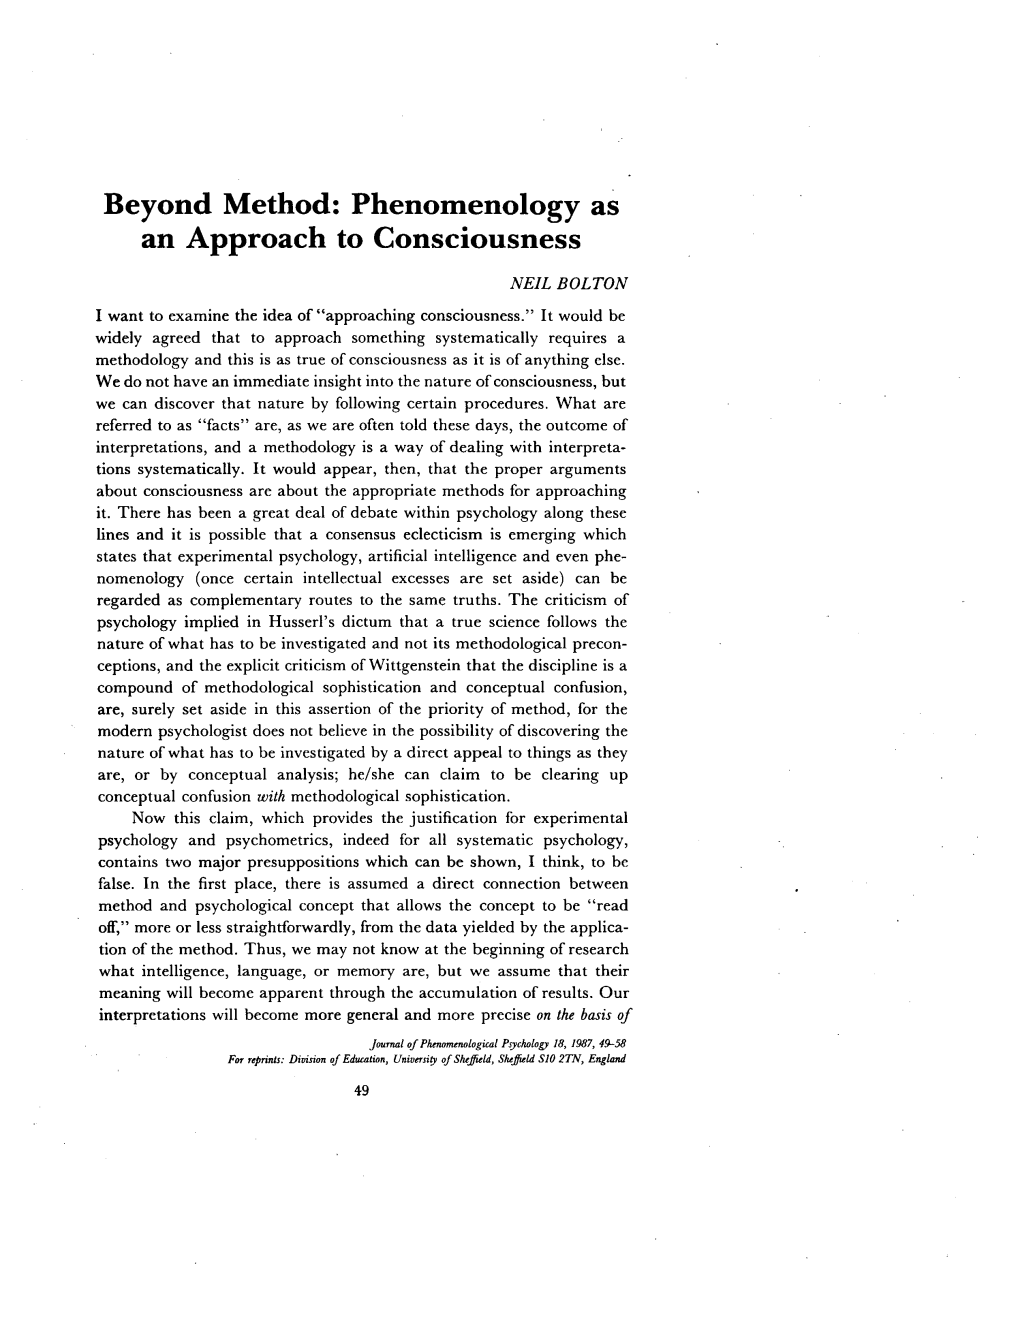 Phenomenology As an Approach to Consciousness NEIL